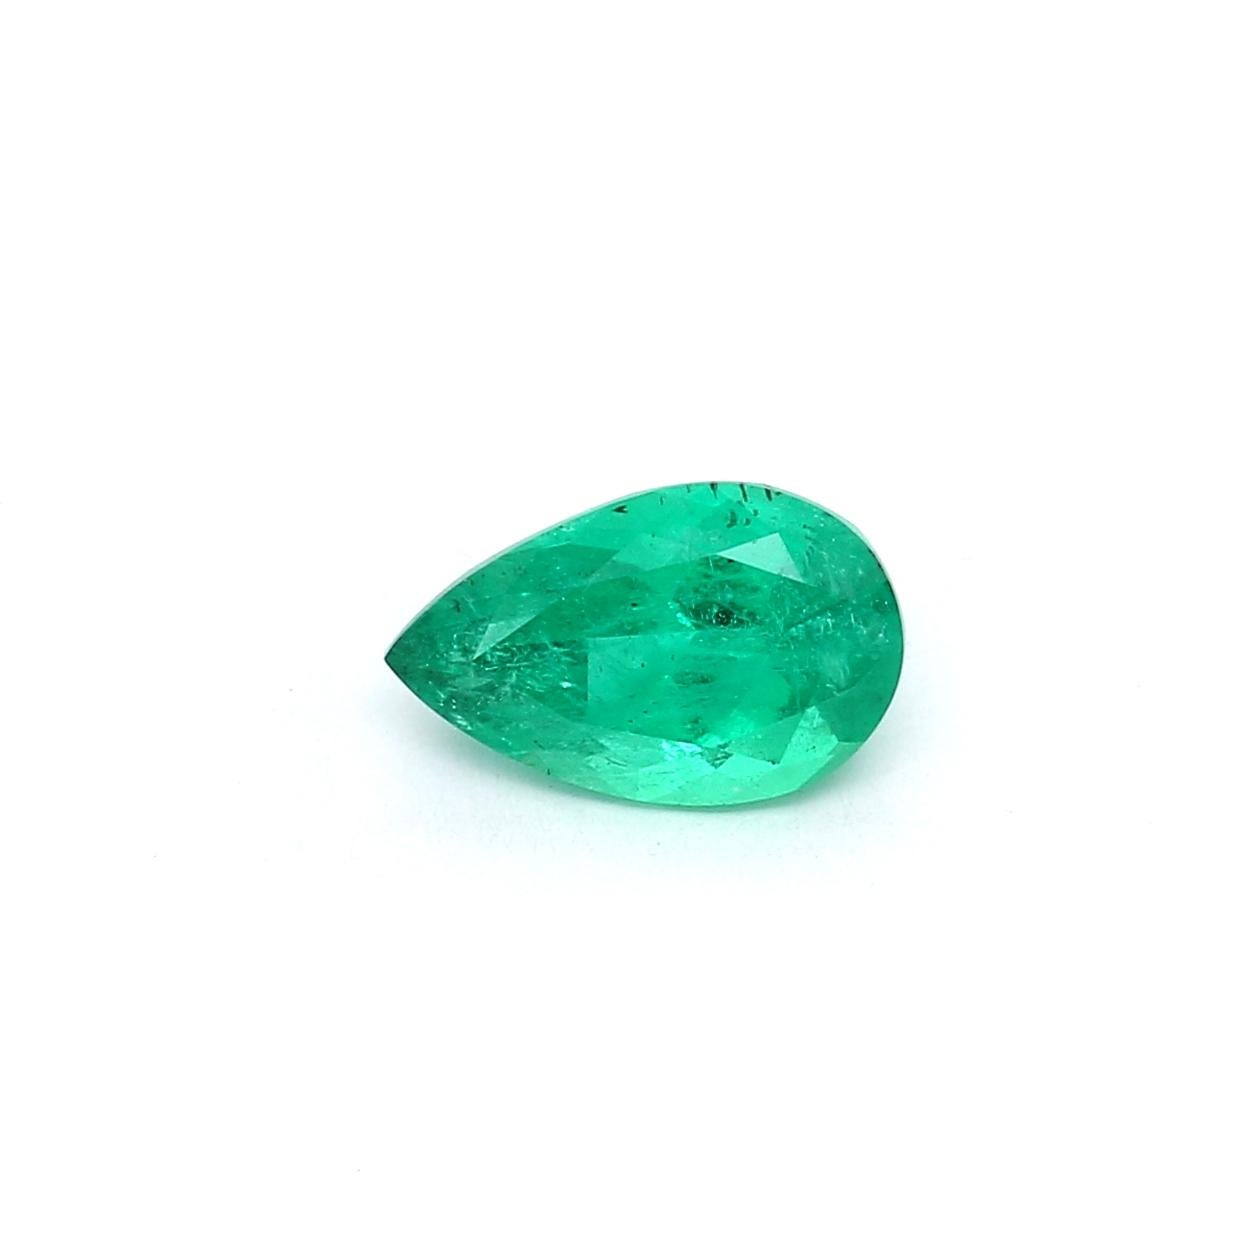 An amazing Russian Emerald which allows jewelers to create a unique piece of wearable art.
This exceptional quality gemstone would make a custom-made jewelry design. Perfect for a Ring or Pendant.

Shape - Pear
Weight - 1.17 ct
Treatment -